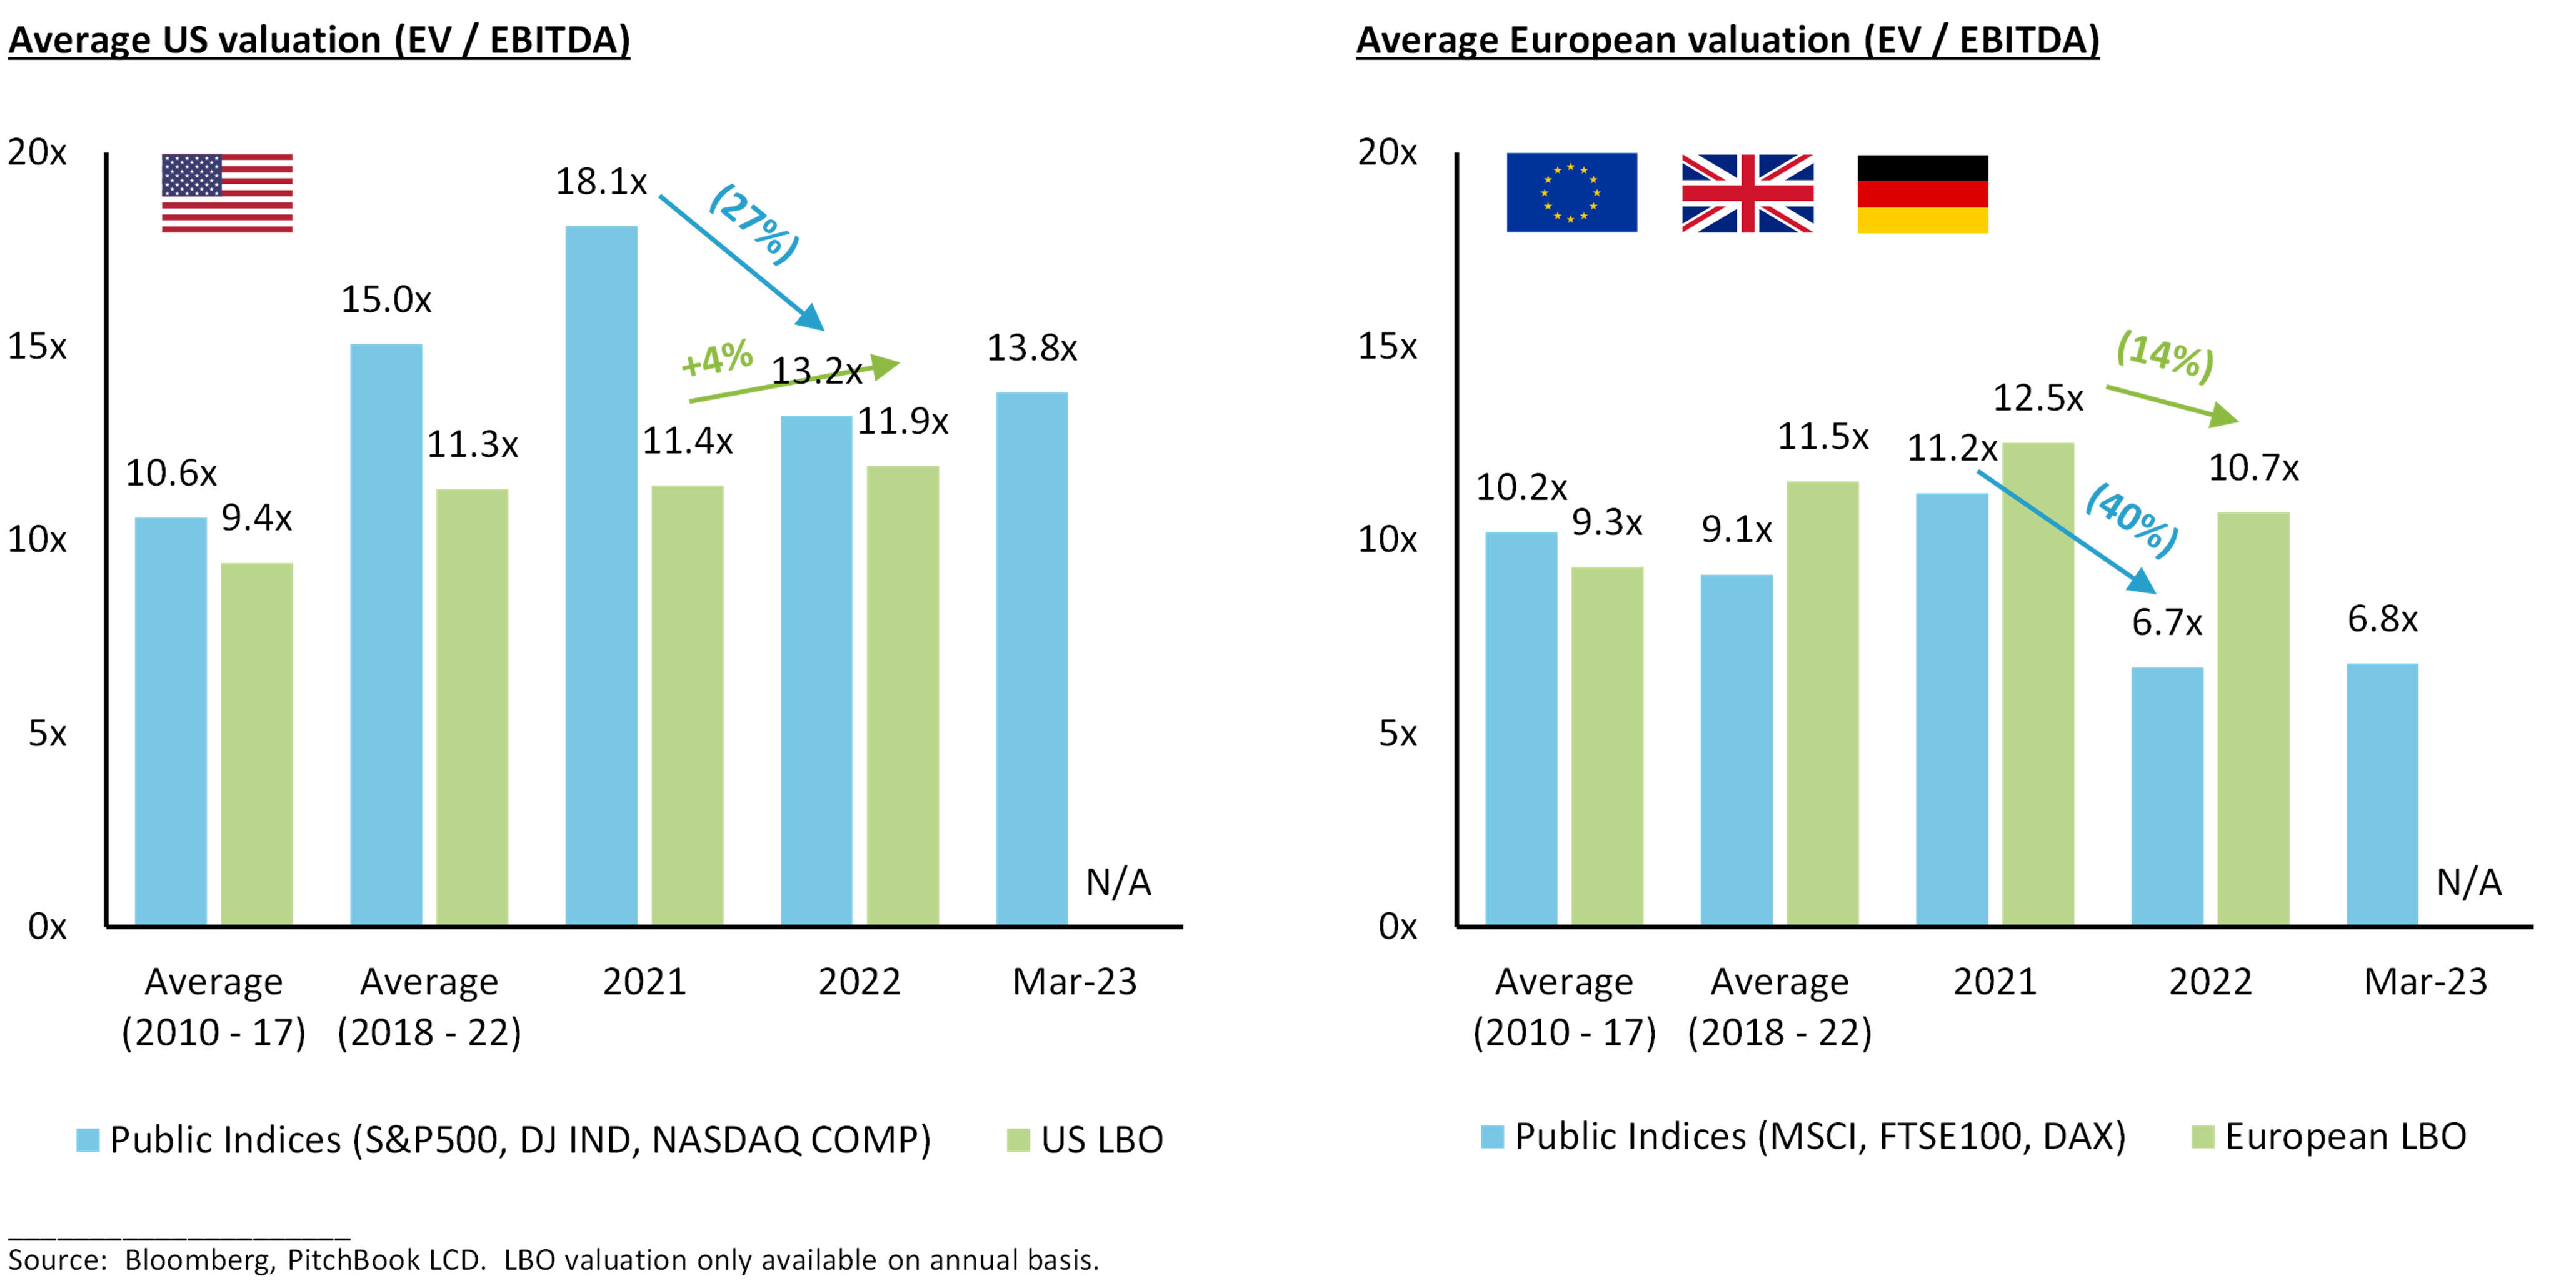 Two bar graphs - average US valuation and average European valuation